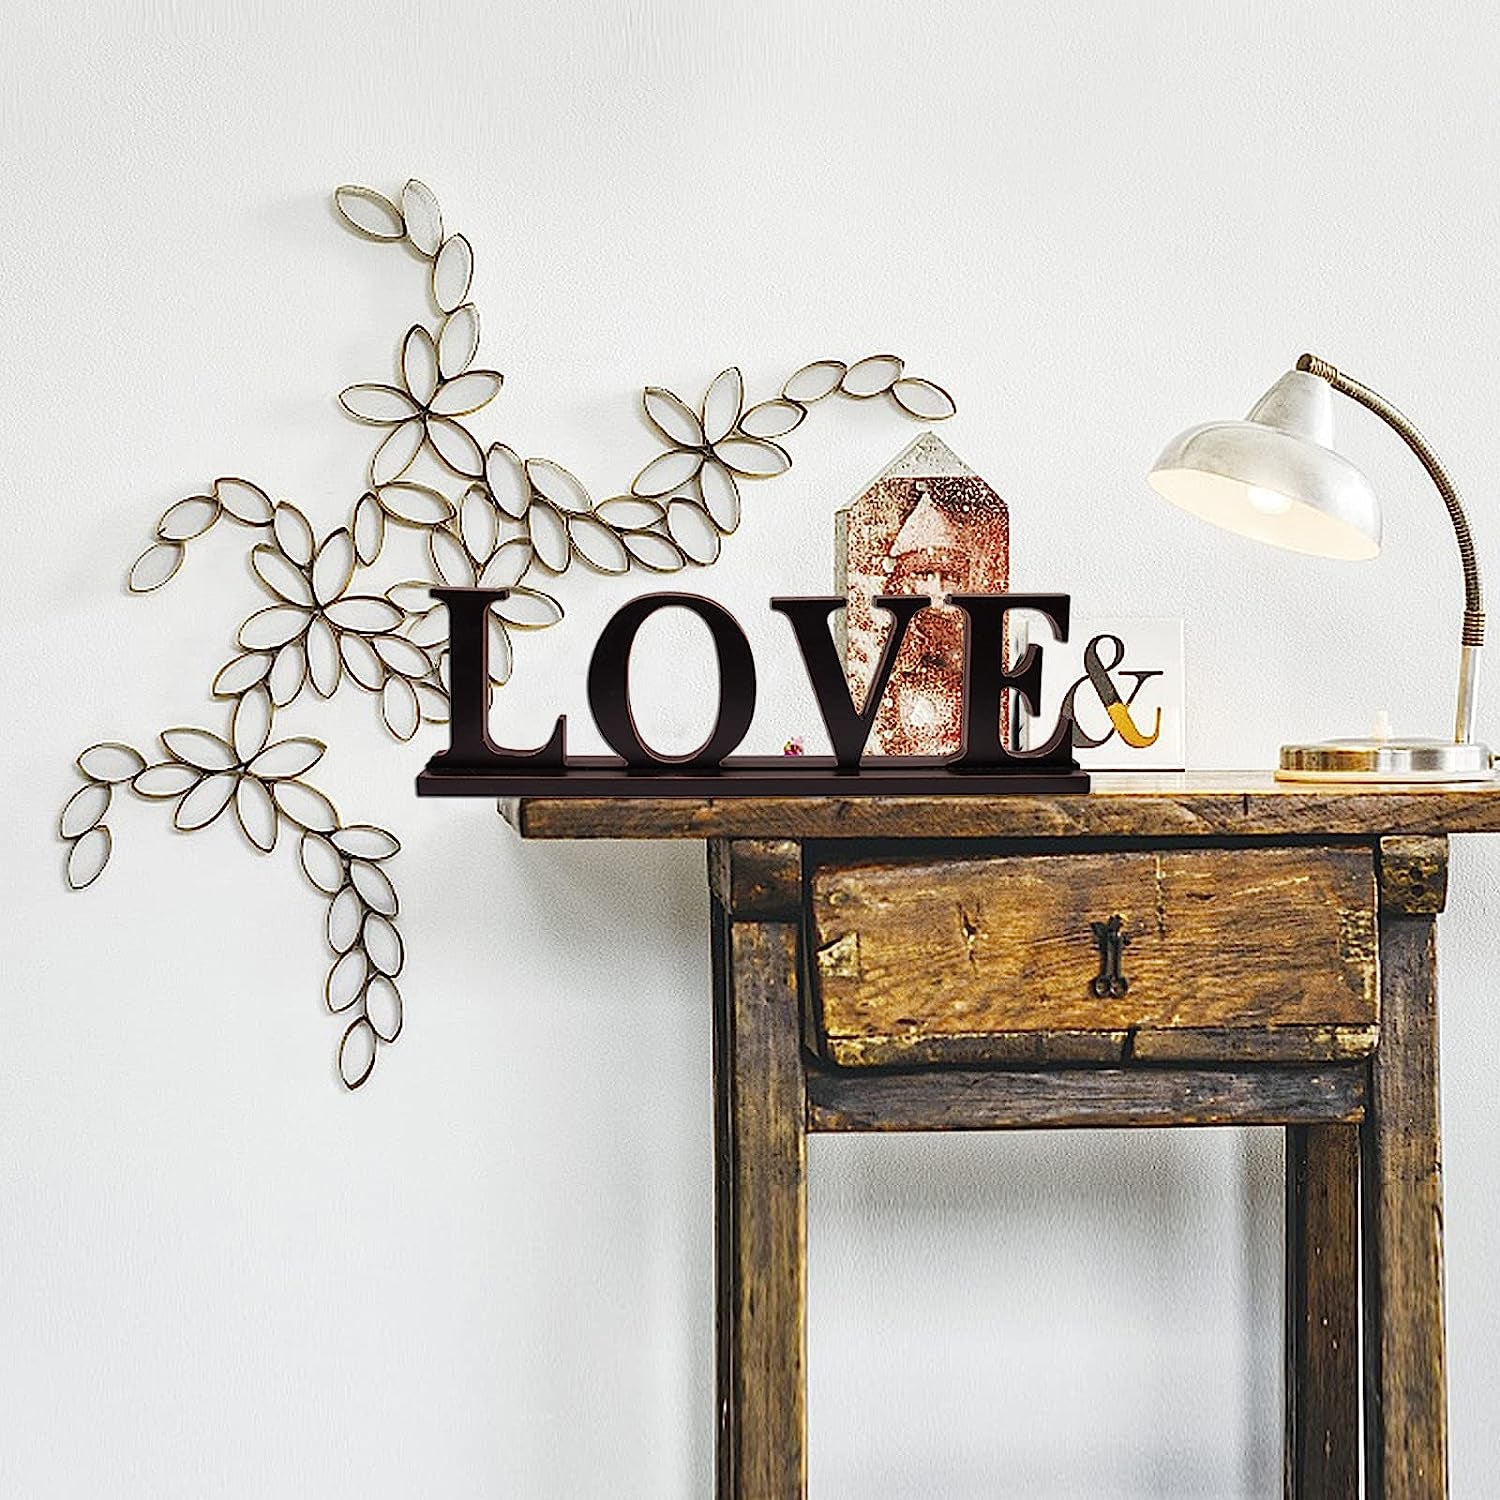 Wooden LOVE Sign Home Decor Table Top Sign Freestanding Decorative Wood Cutout Letter Valentine'S Day Love Tableotp Decor Wedding Decor